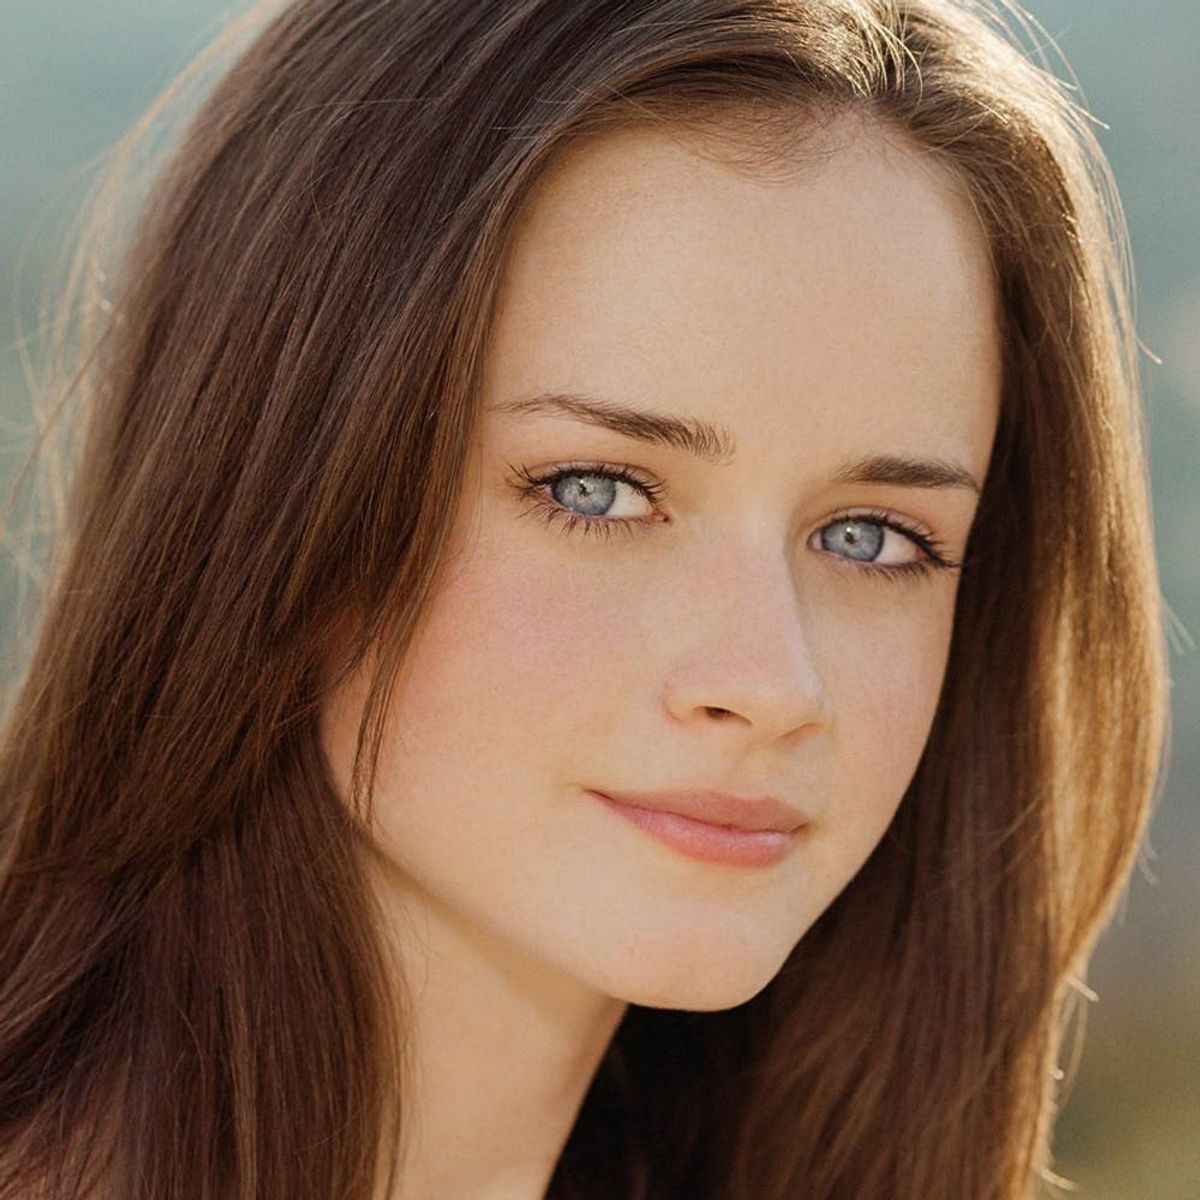 Alexis Bledel May Have Just Accidentally Revealed Who Rory WON’T End Up With